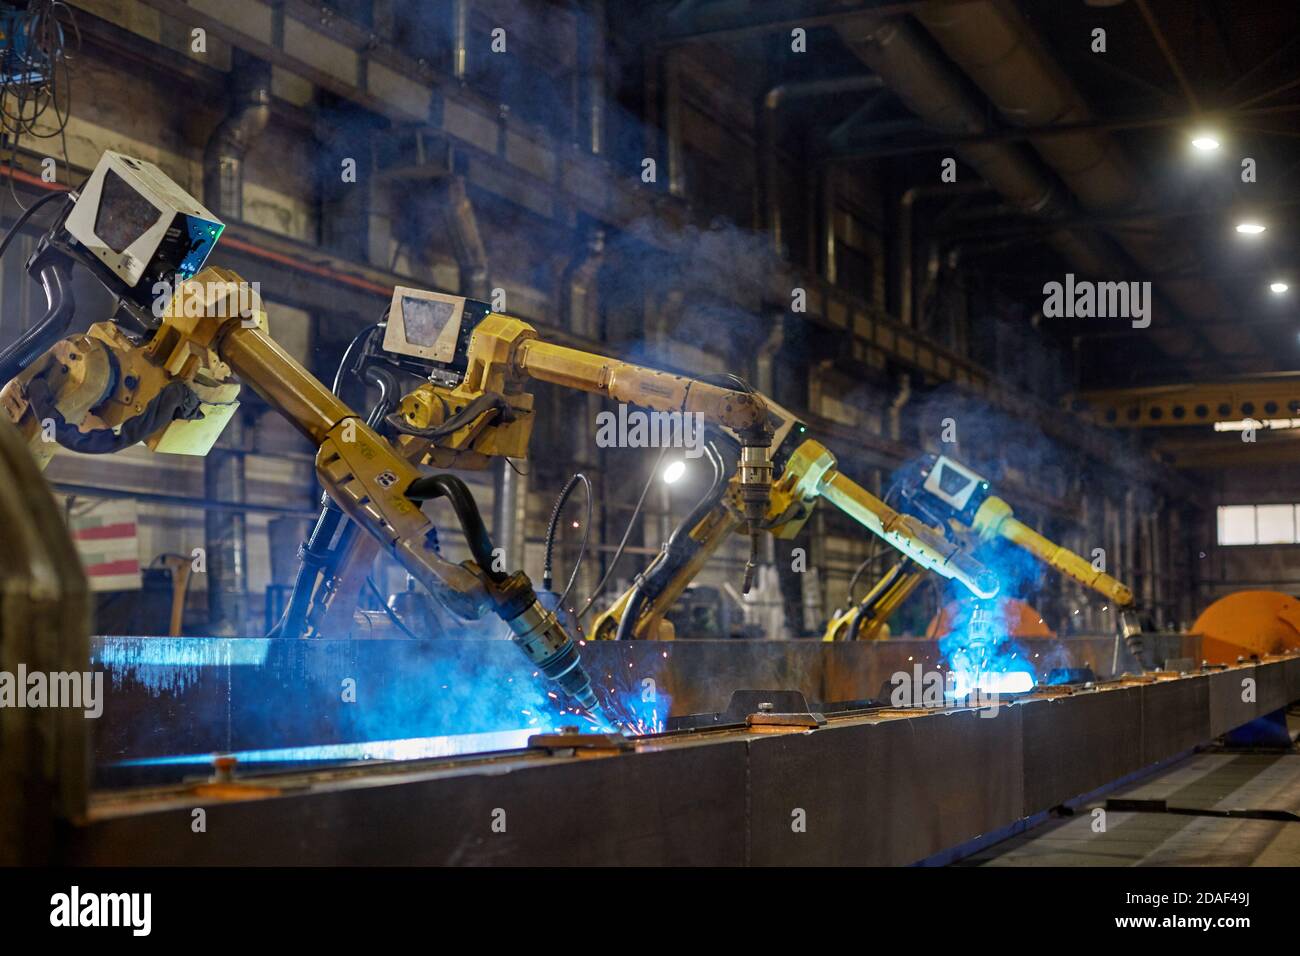 Robot welding is welding assembly automotive part in factory Stock Photo